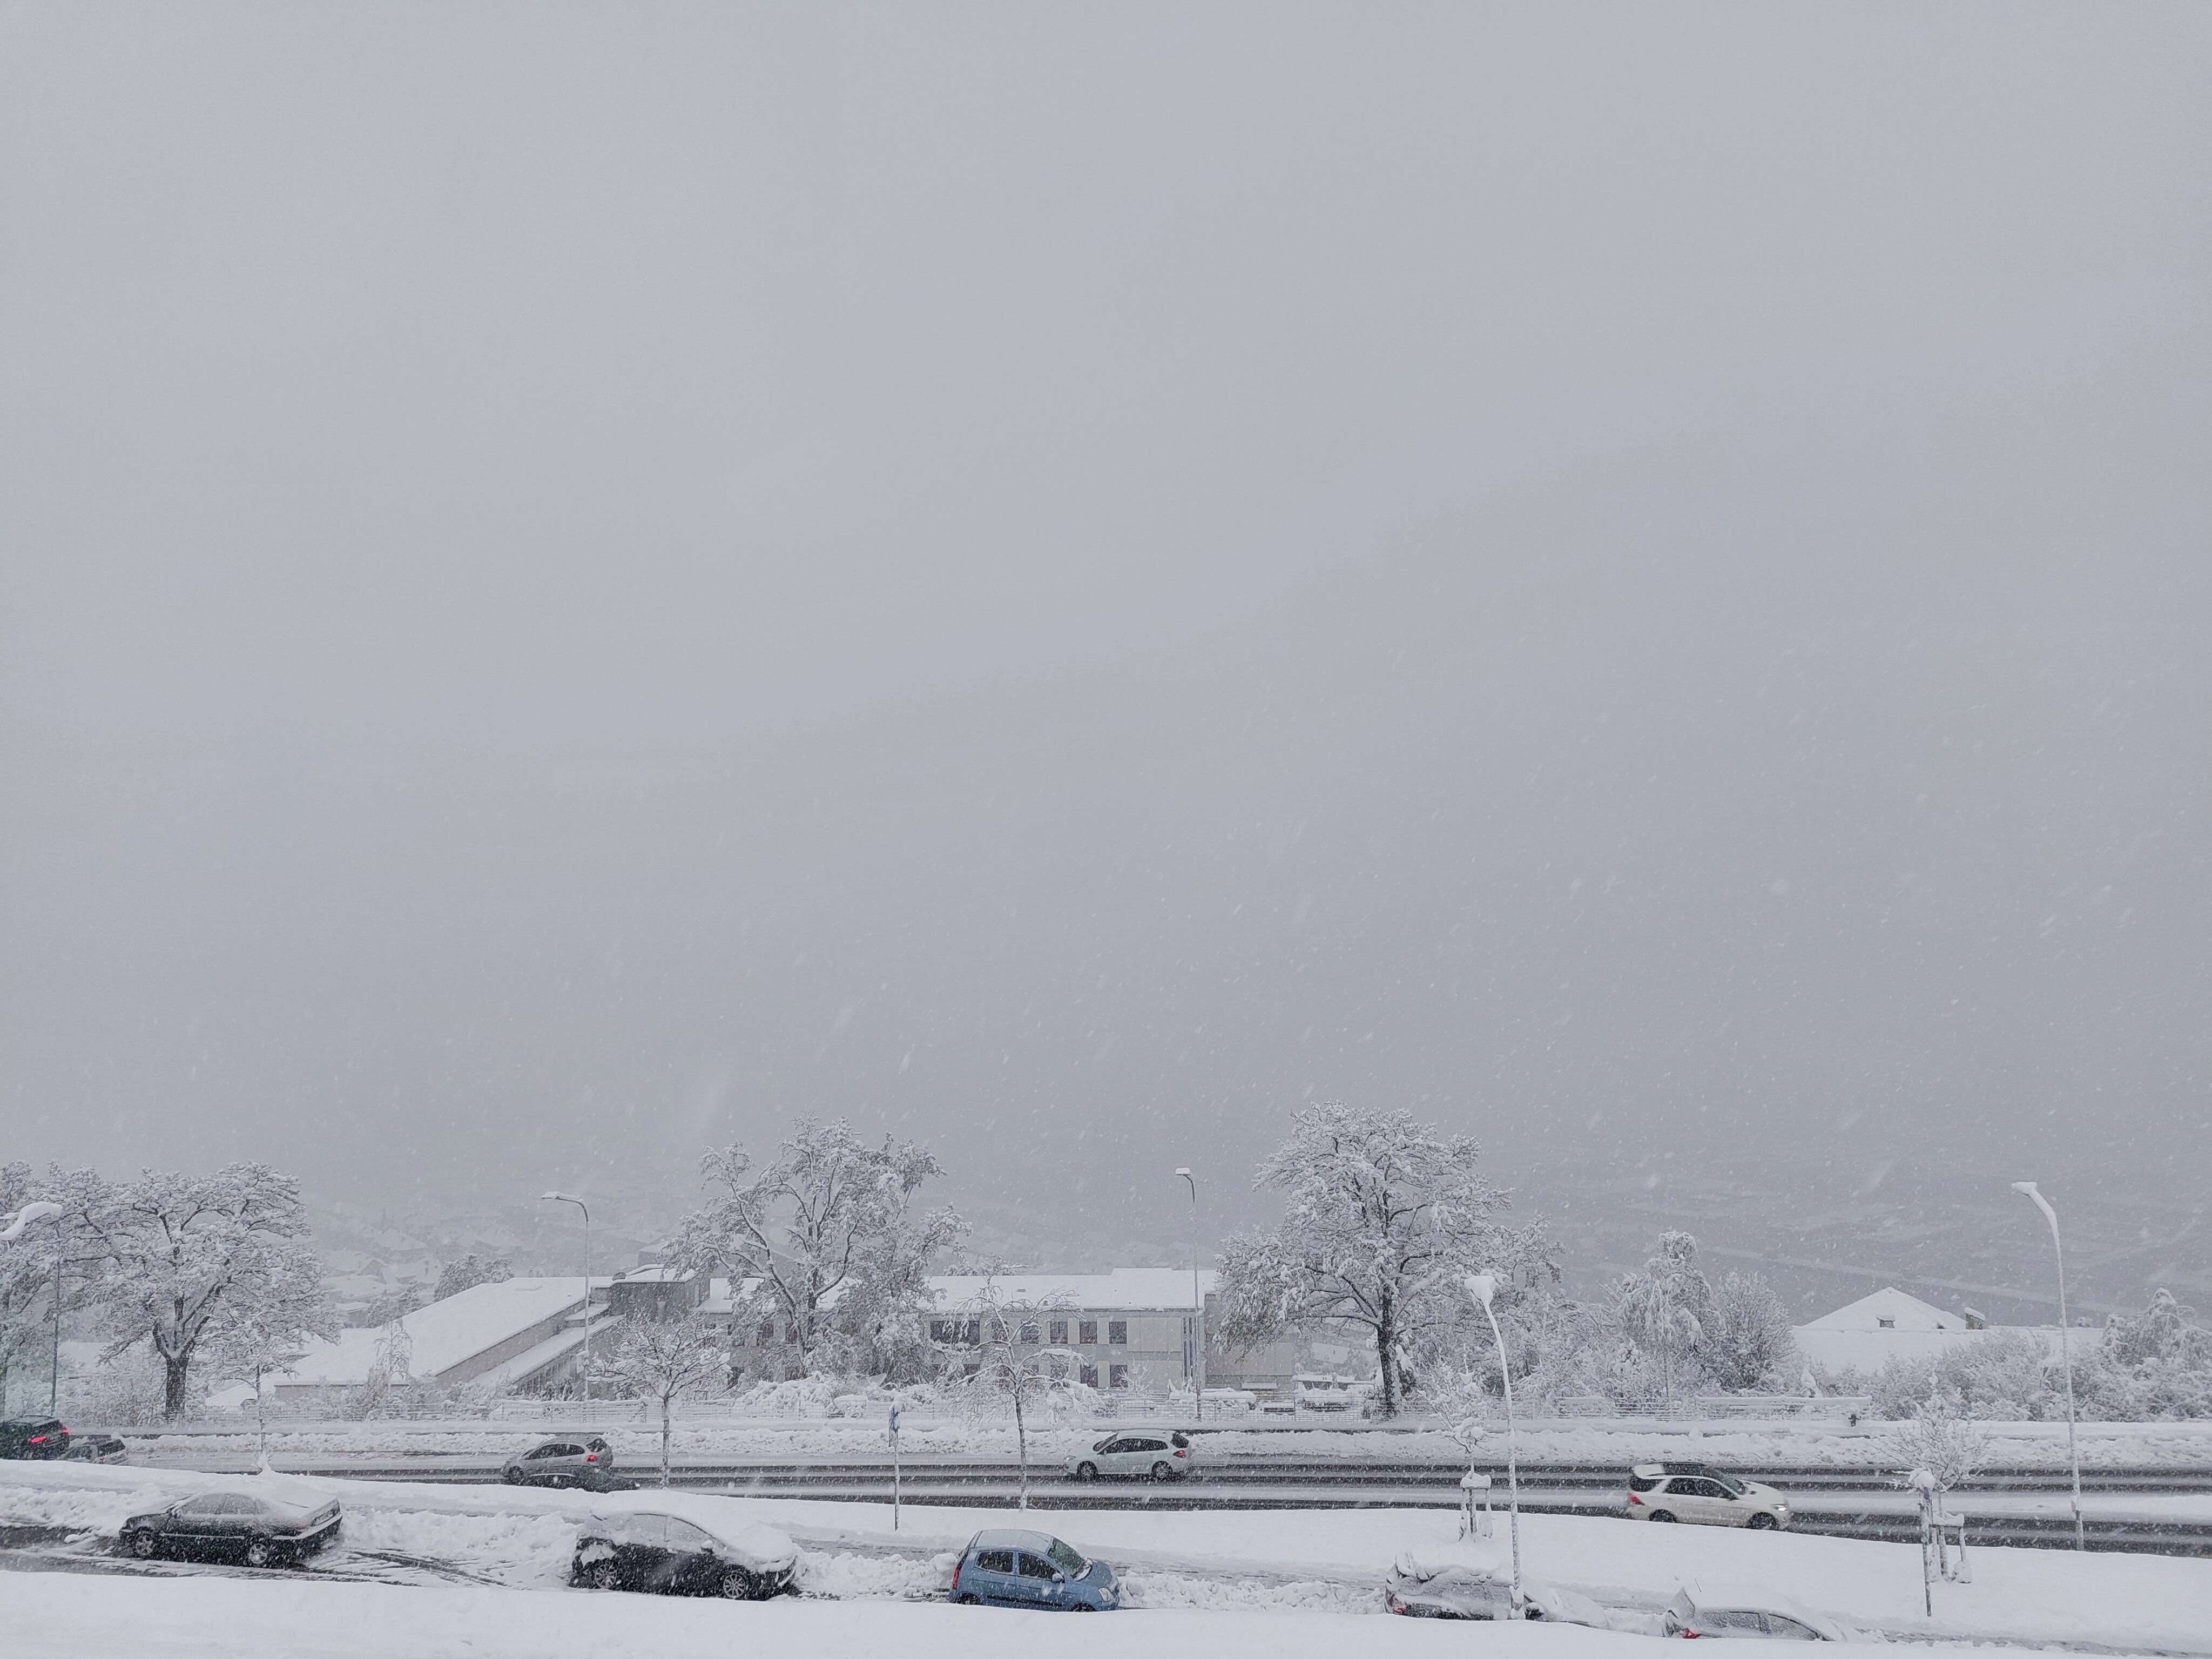 Downtown Zürich and alps in snowstorm, no visibility